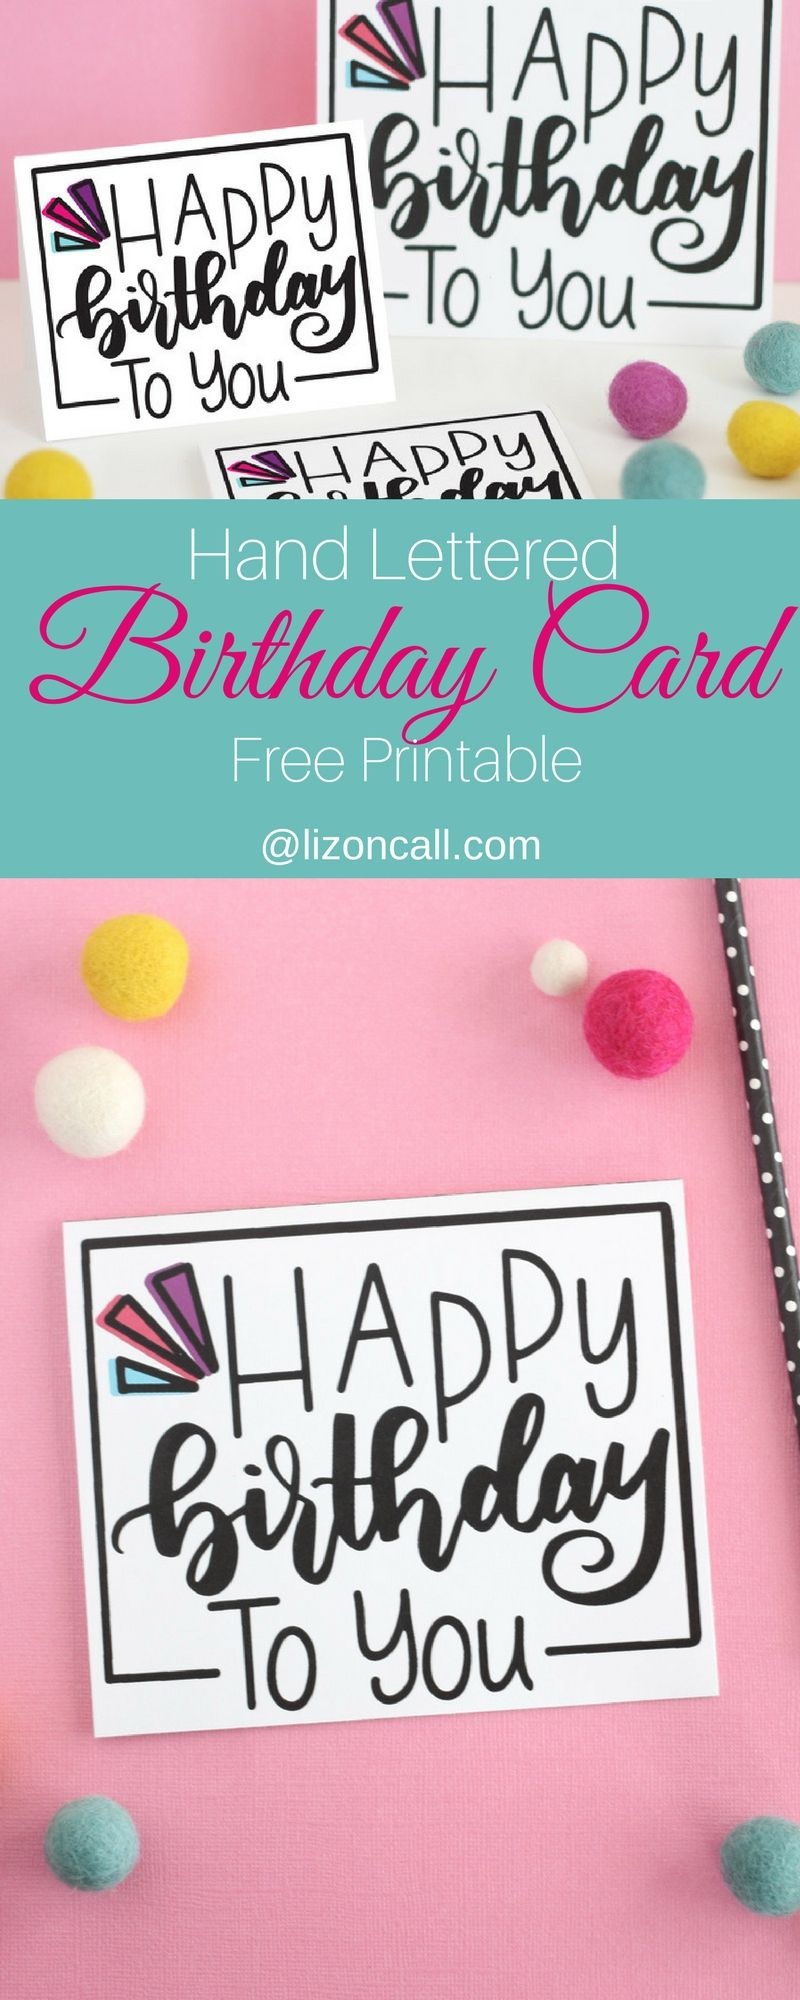 Hand Lettered Free Printable Birthday Card | Lettering | Free - Free Printable Birthday Cards For Your Best Friend